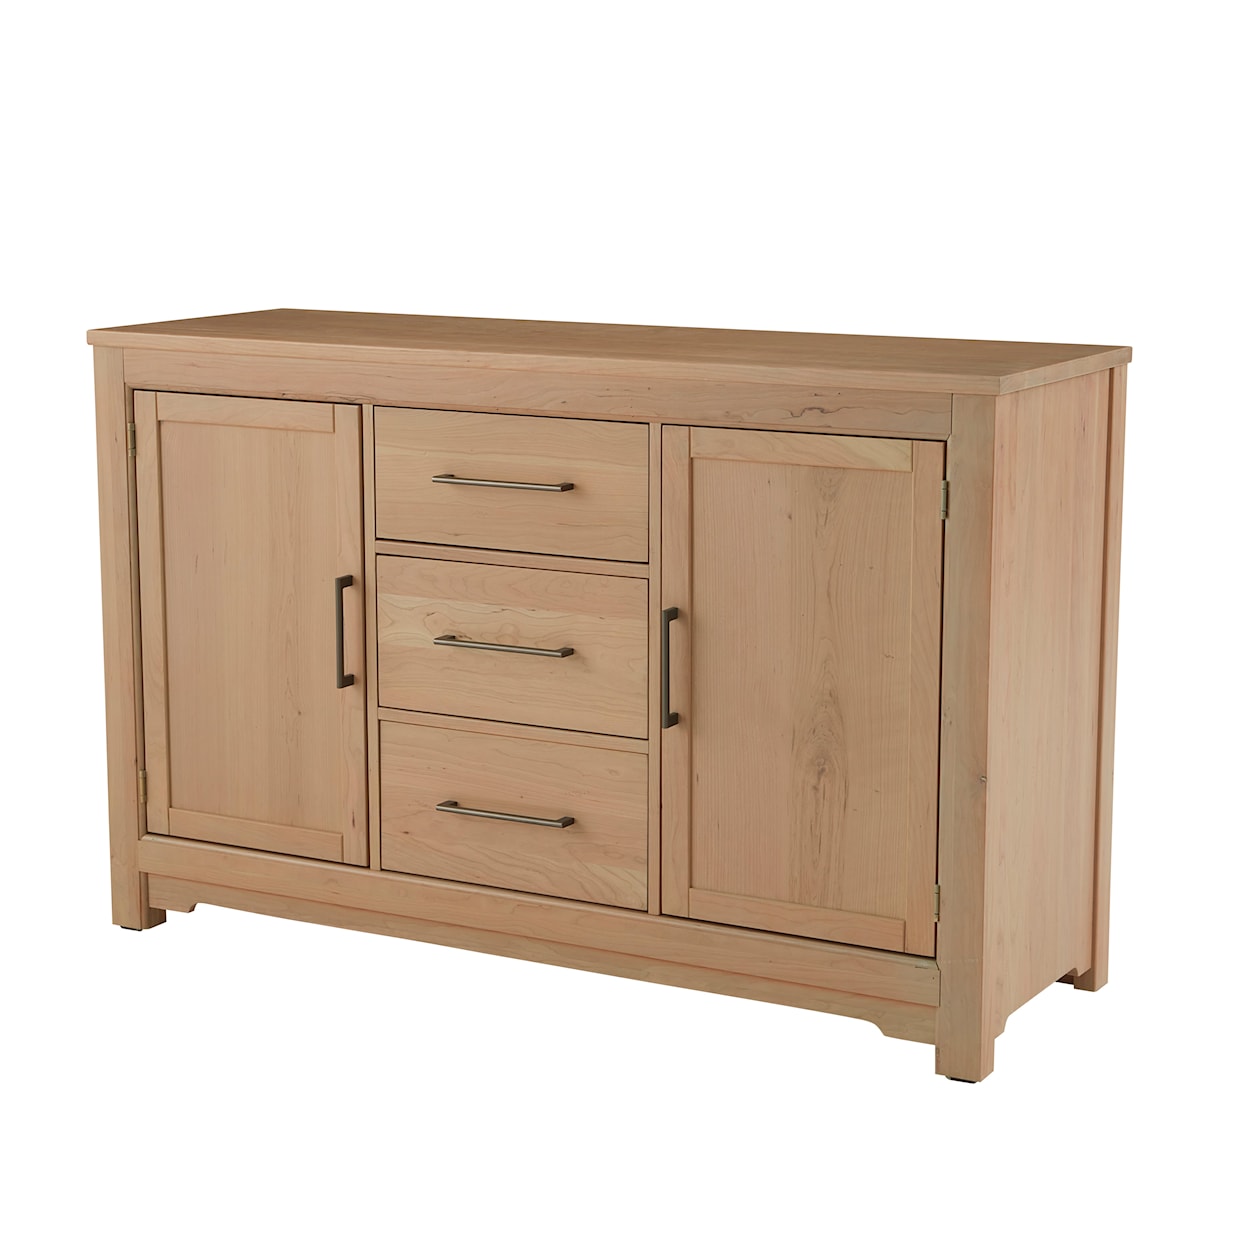 Vaughan Bassett Crafted Cherry - Bleached Dining Room Server